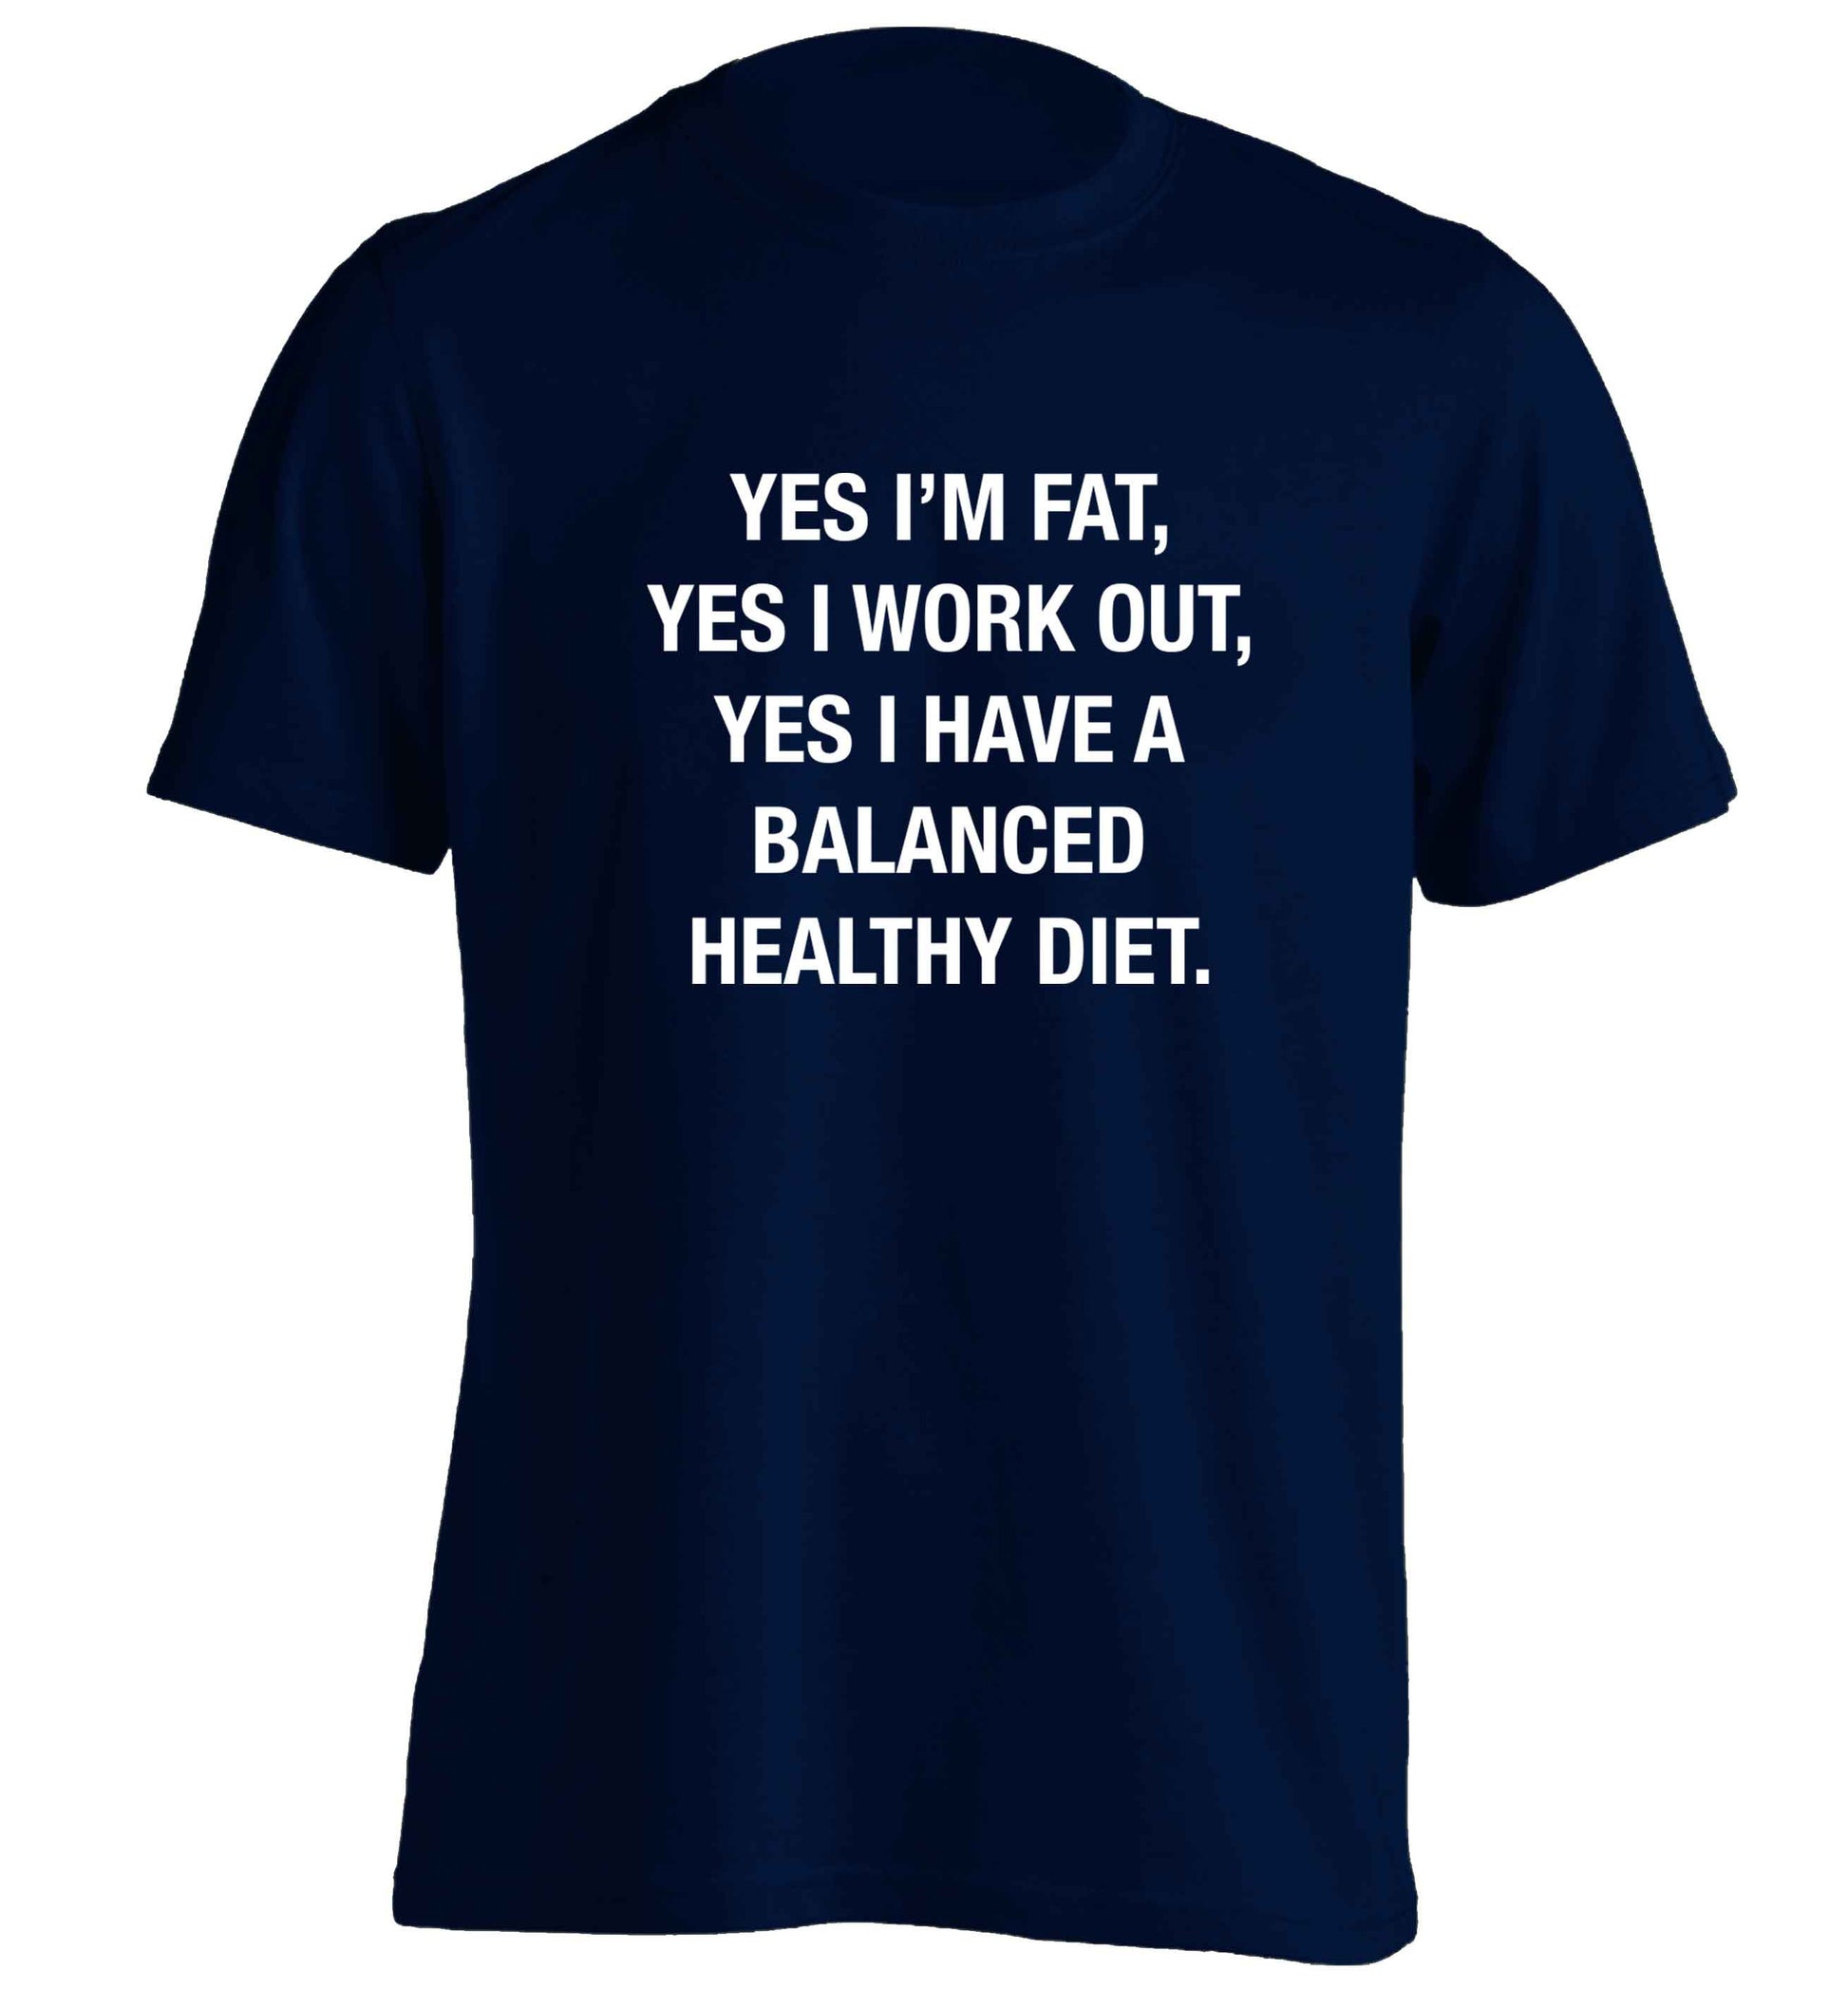 Yes I'm fat, yes I work out, yes I have a balanced healthy diet adults unisex navy Tshirt 2XL